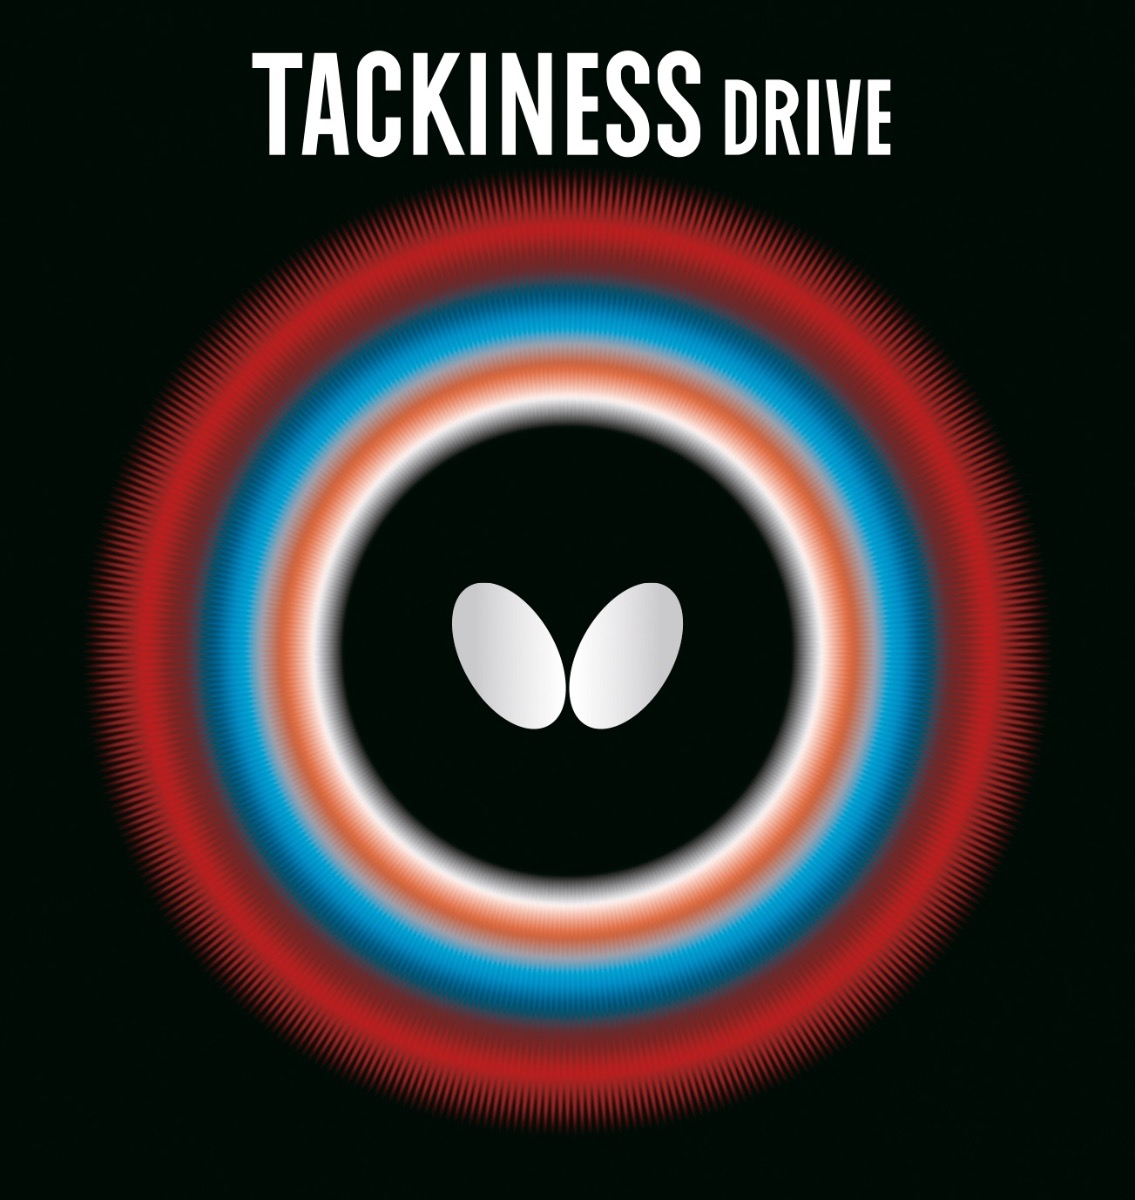 Butterfly Tackiness Drive